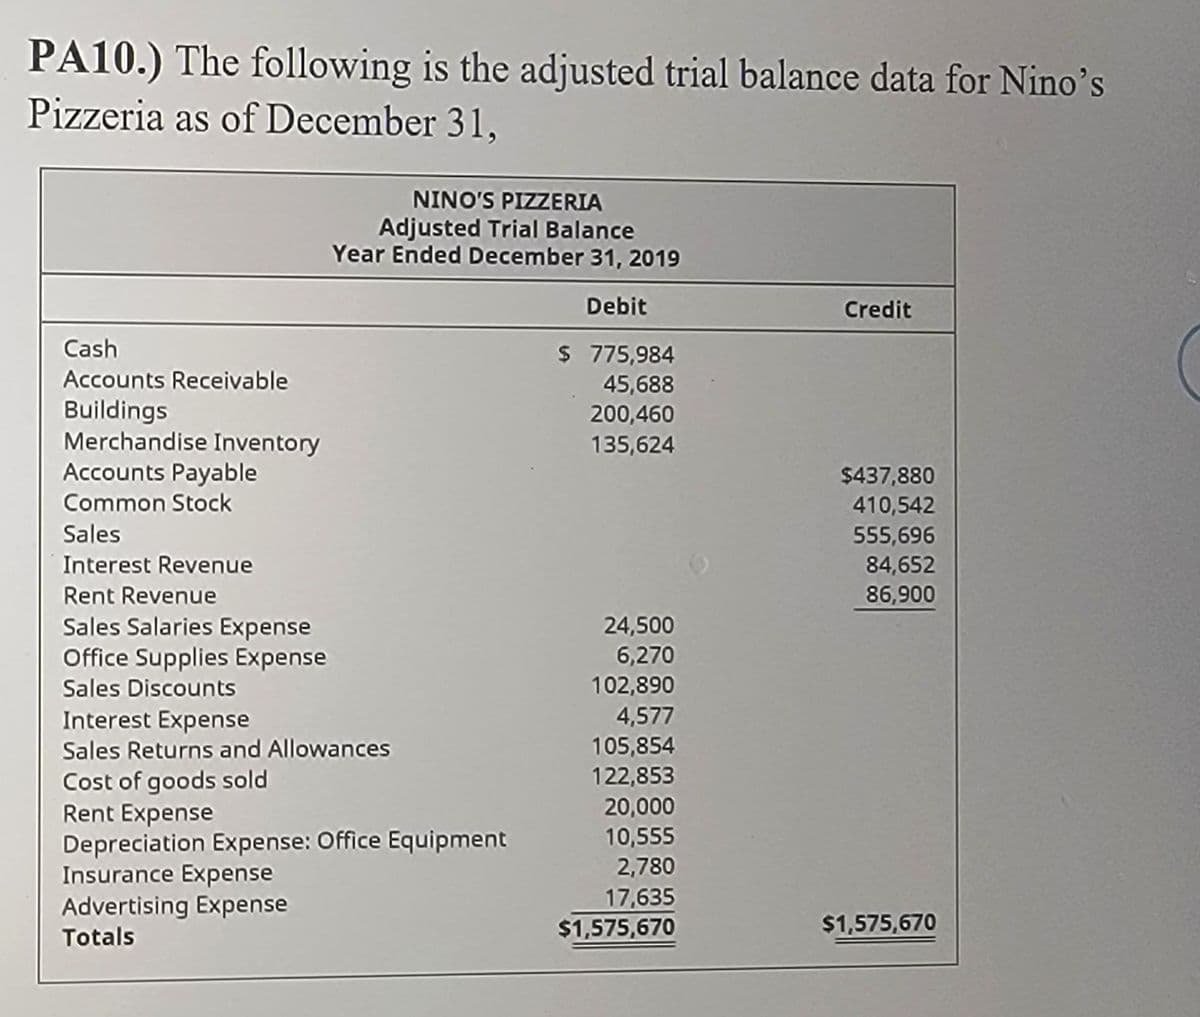 PA10.) The following is the adjusted trial balance data for Nino's
Pizzeria as of December 31,
NINO'S PIZZERIA
Adjusted Trial Balance
Year Ended December 31, 2019
Debit
Credit
Cash
$ 775,984
Accounts Receivable
45,688
200,460
Buildings
Merchandise Inventory
Accounts Payable
Common Stock
135,624
$437,880
410,542
Sales
555,696
84,652
Interest Revenue
Rent Revenue
86,900
Sales Salaries Expense
Office Supplies Expense
24,500
6,270
Sales Discounts
102,890
Interest Expense
Sales Returns and Allowances
4,577
105,854
122,853
Cost of goods sold
Rent Expense
Depreciation Expense: Office Equipment
Insurance Expense
Advertising Expense
Totals
20,000
10,555
2,780
17,635
$1,575,670
$1,575,670
